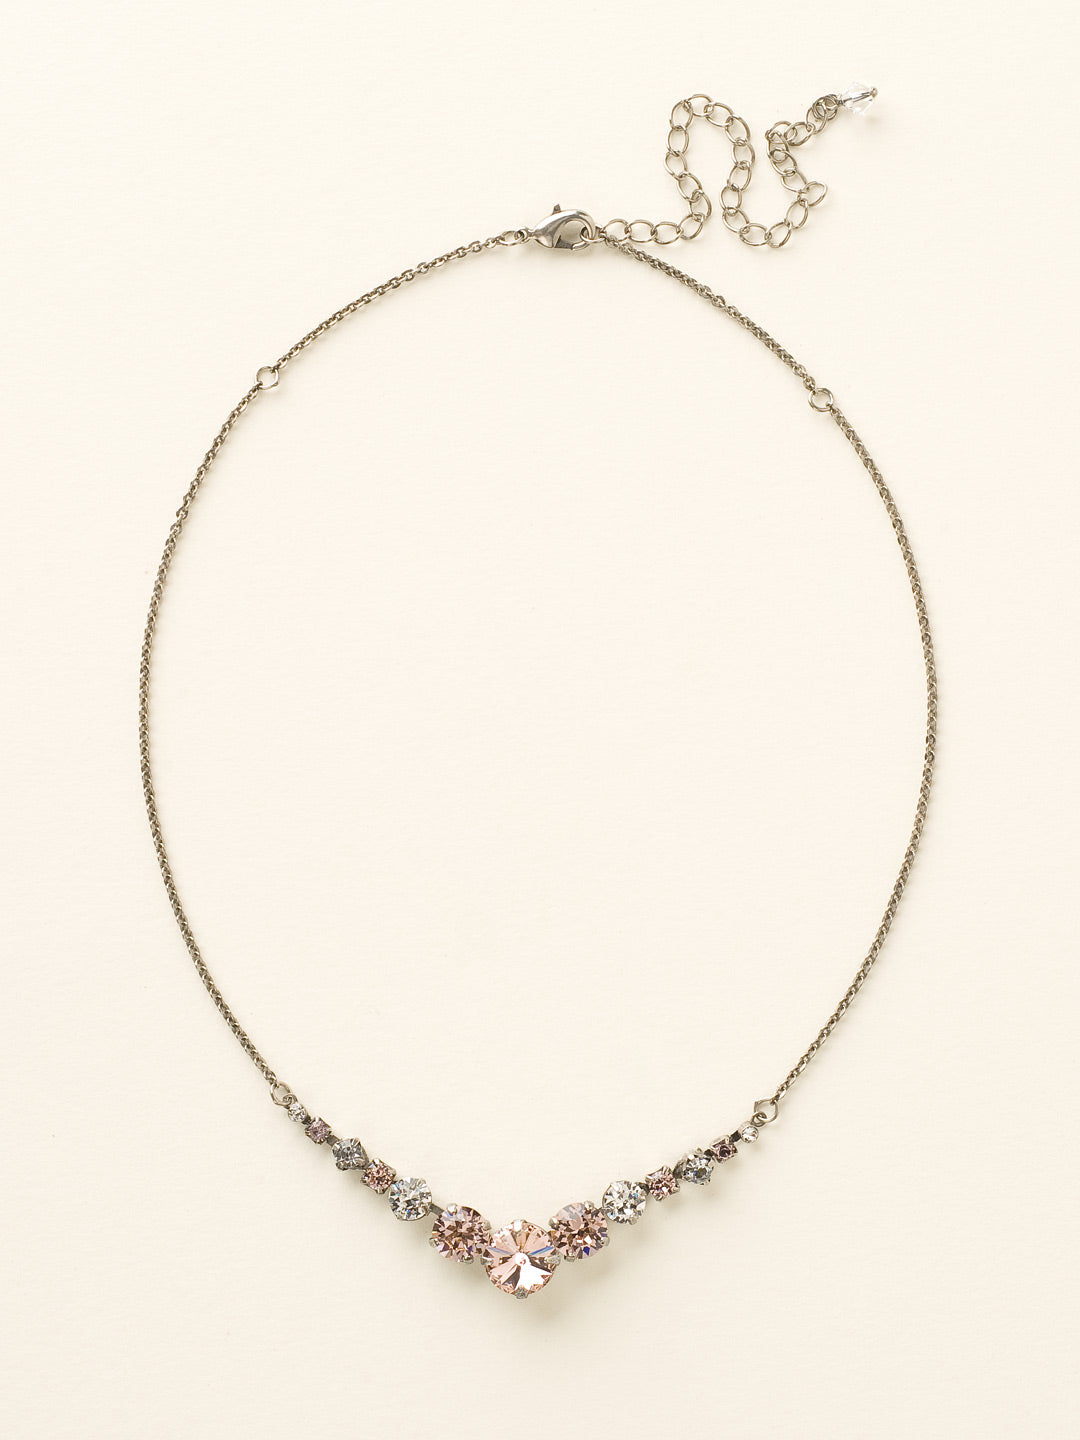 London Tennis Necklace - NCQ14ASCRR - A long, simple chain paired with gorgeous round stones is exactly what every girl needs to dress things up. This round stone necklace is perfect for layering, or to just wear alone. Let the simple sparkle take over. From Sorrelli's Crystal Rose collection in our Antique Silver-tone finish.